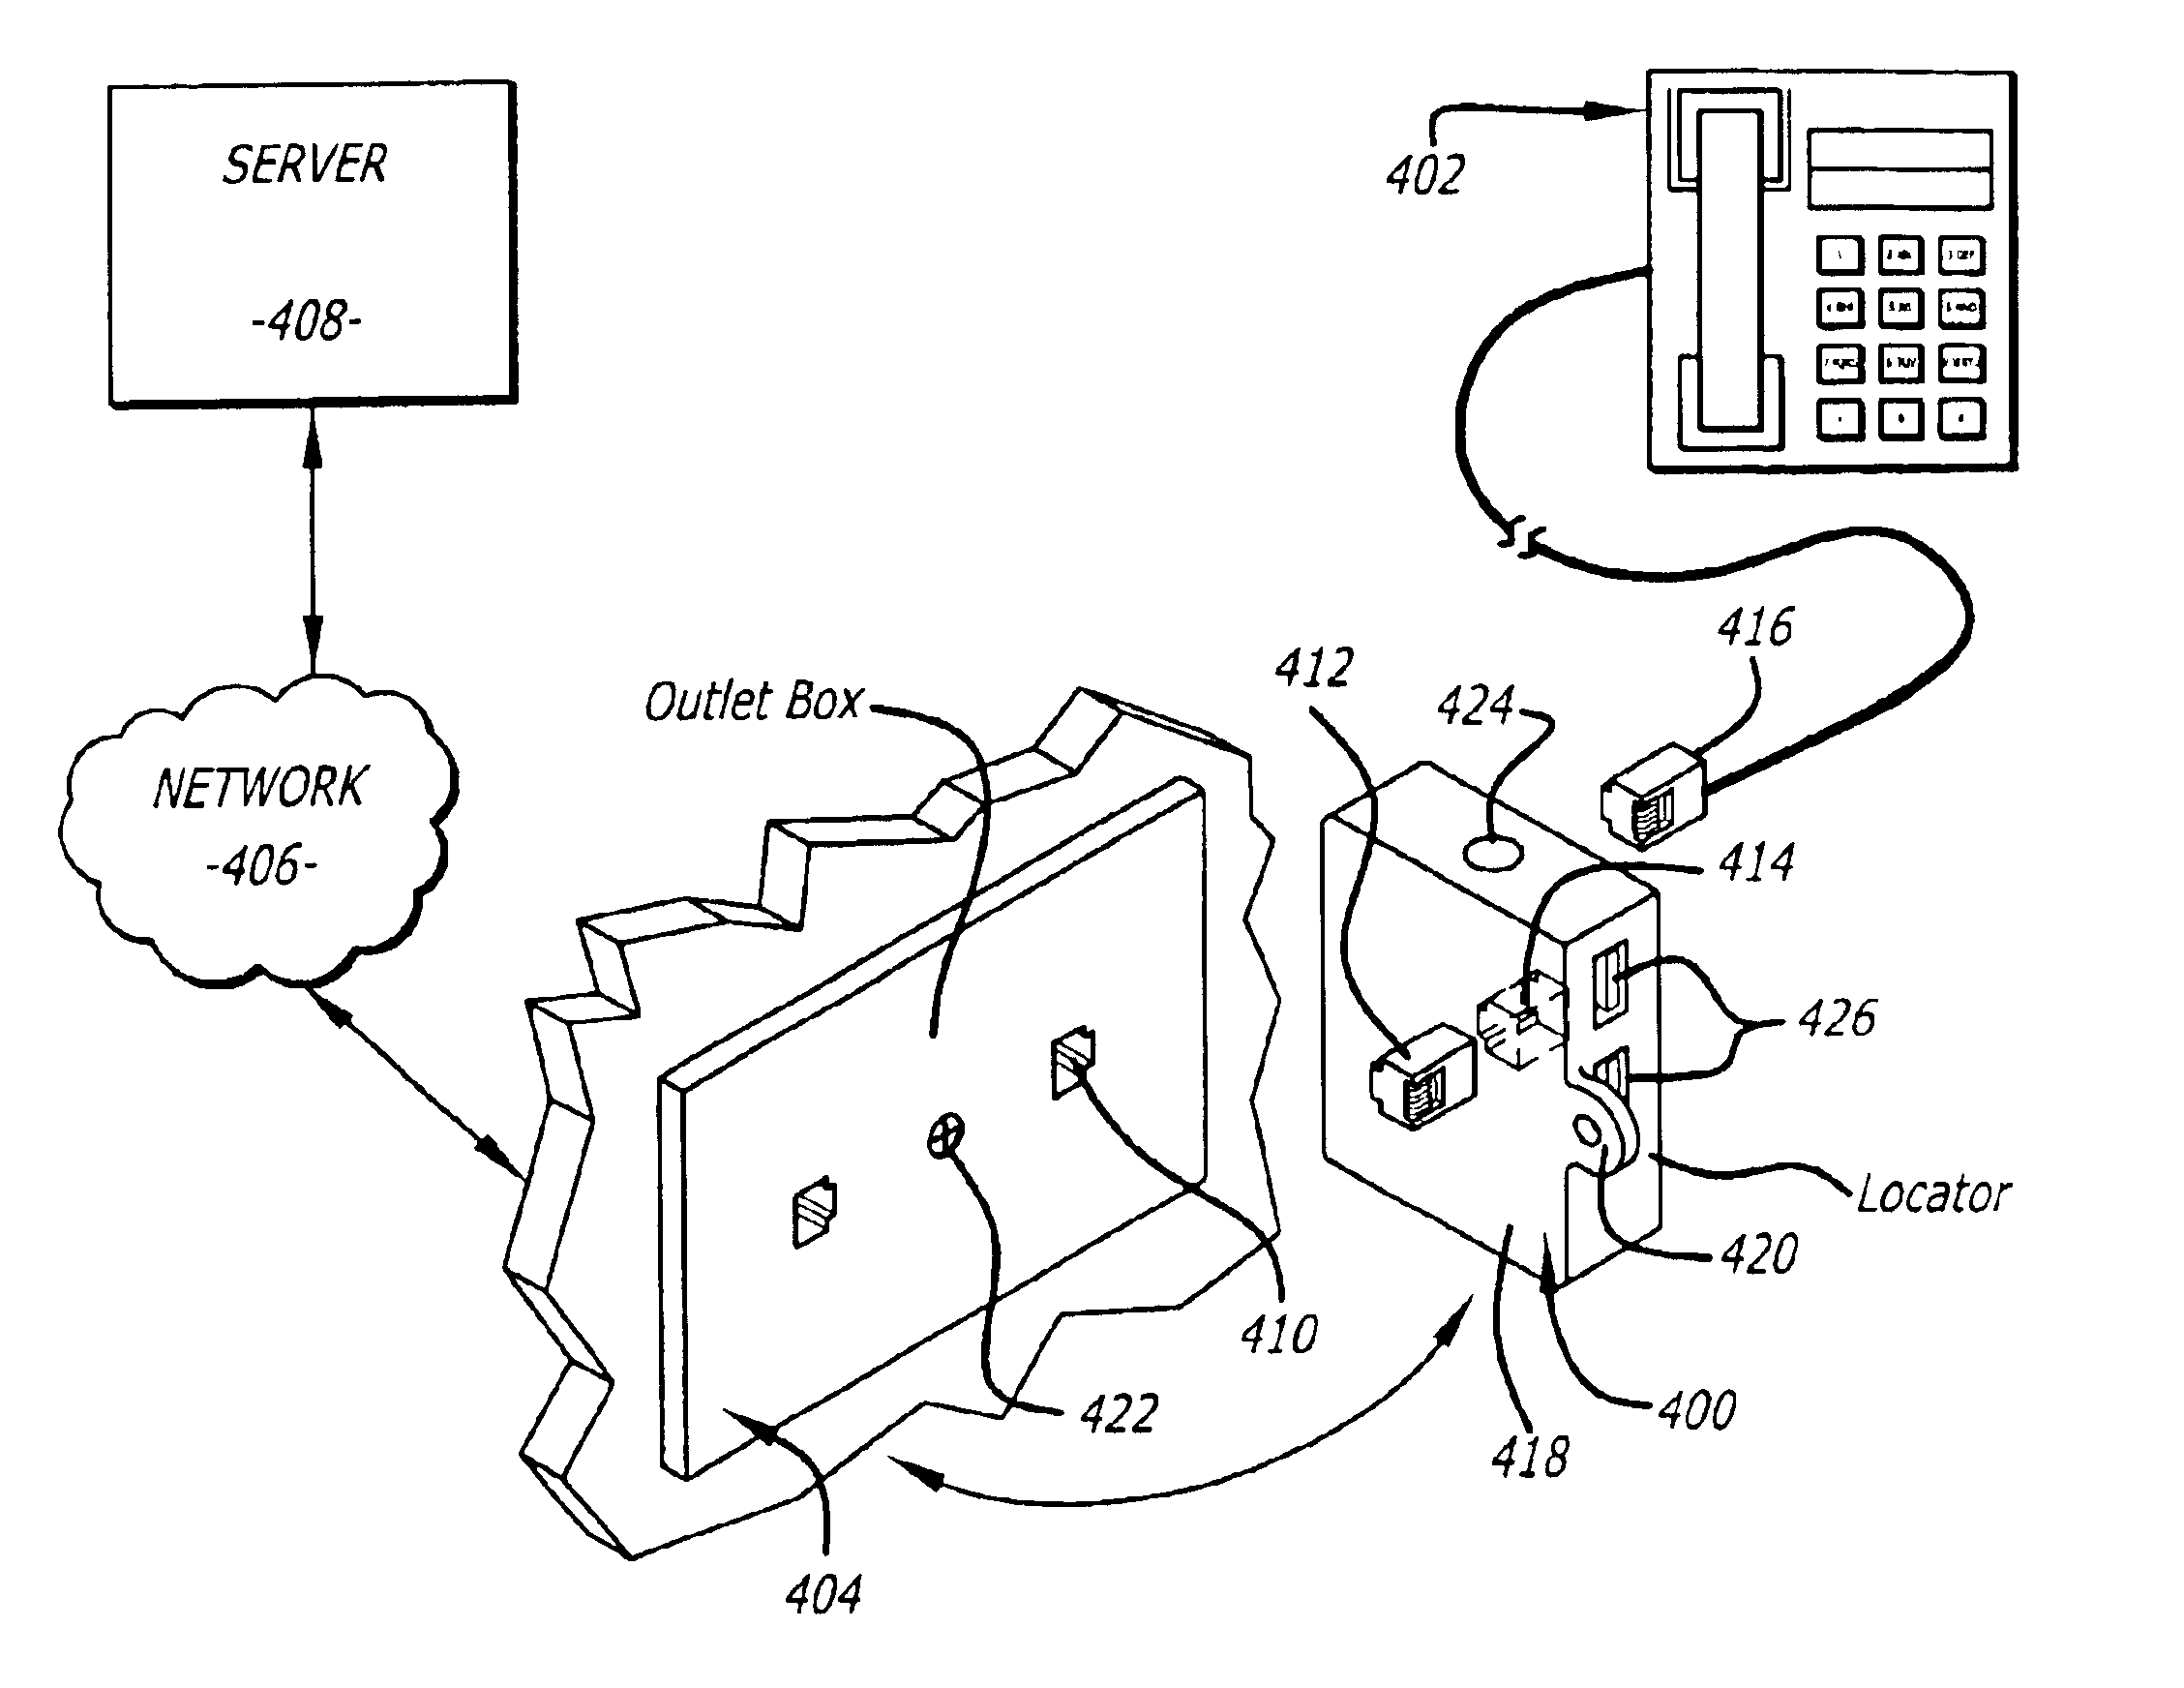 Locator for physically locating an electronic device in a communication network